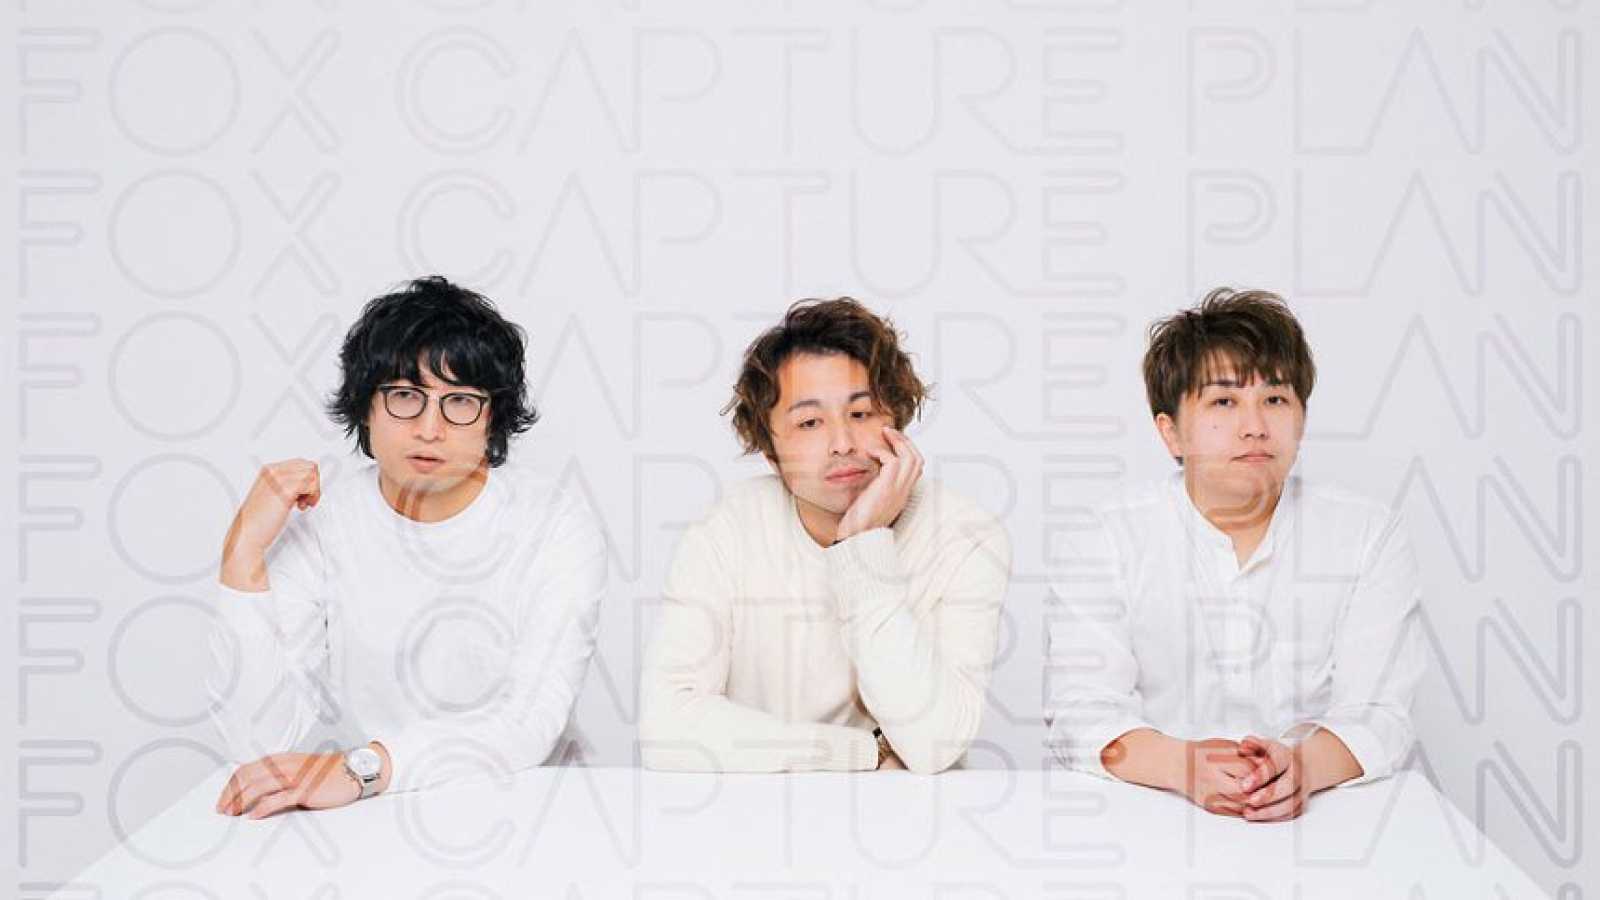 fox capture plan Collaborate with Survive Said The Prophet's Yosh for New Single © fox capture plan All rights reserved.